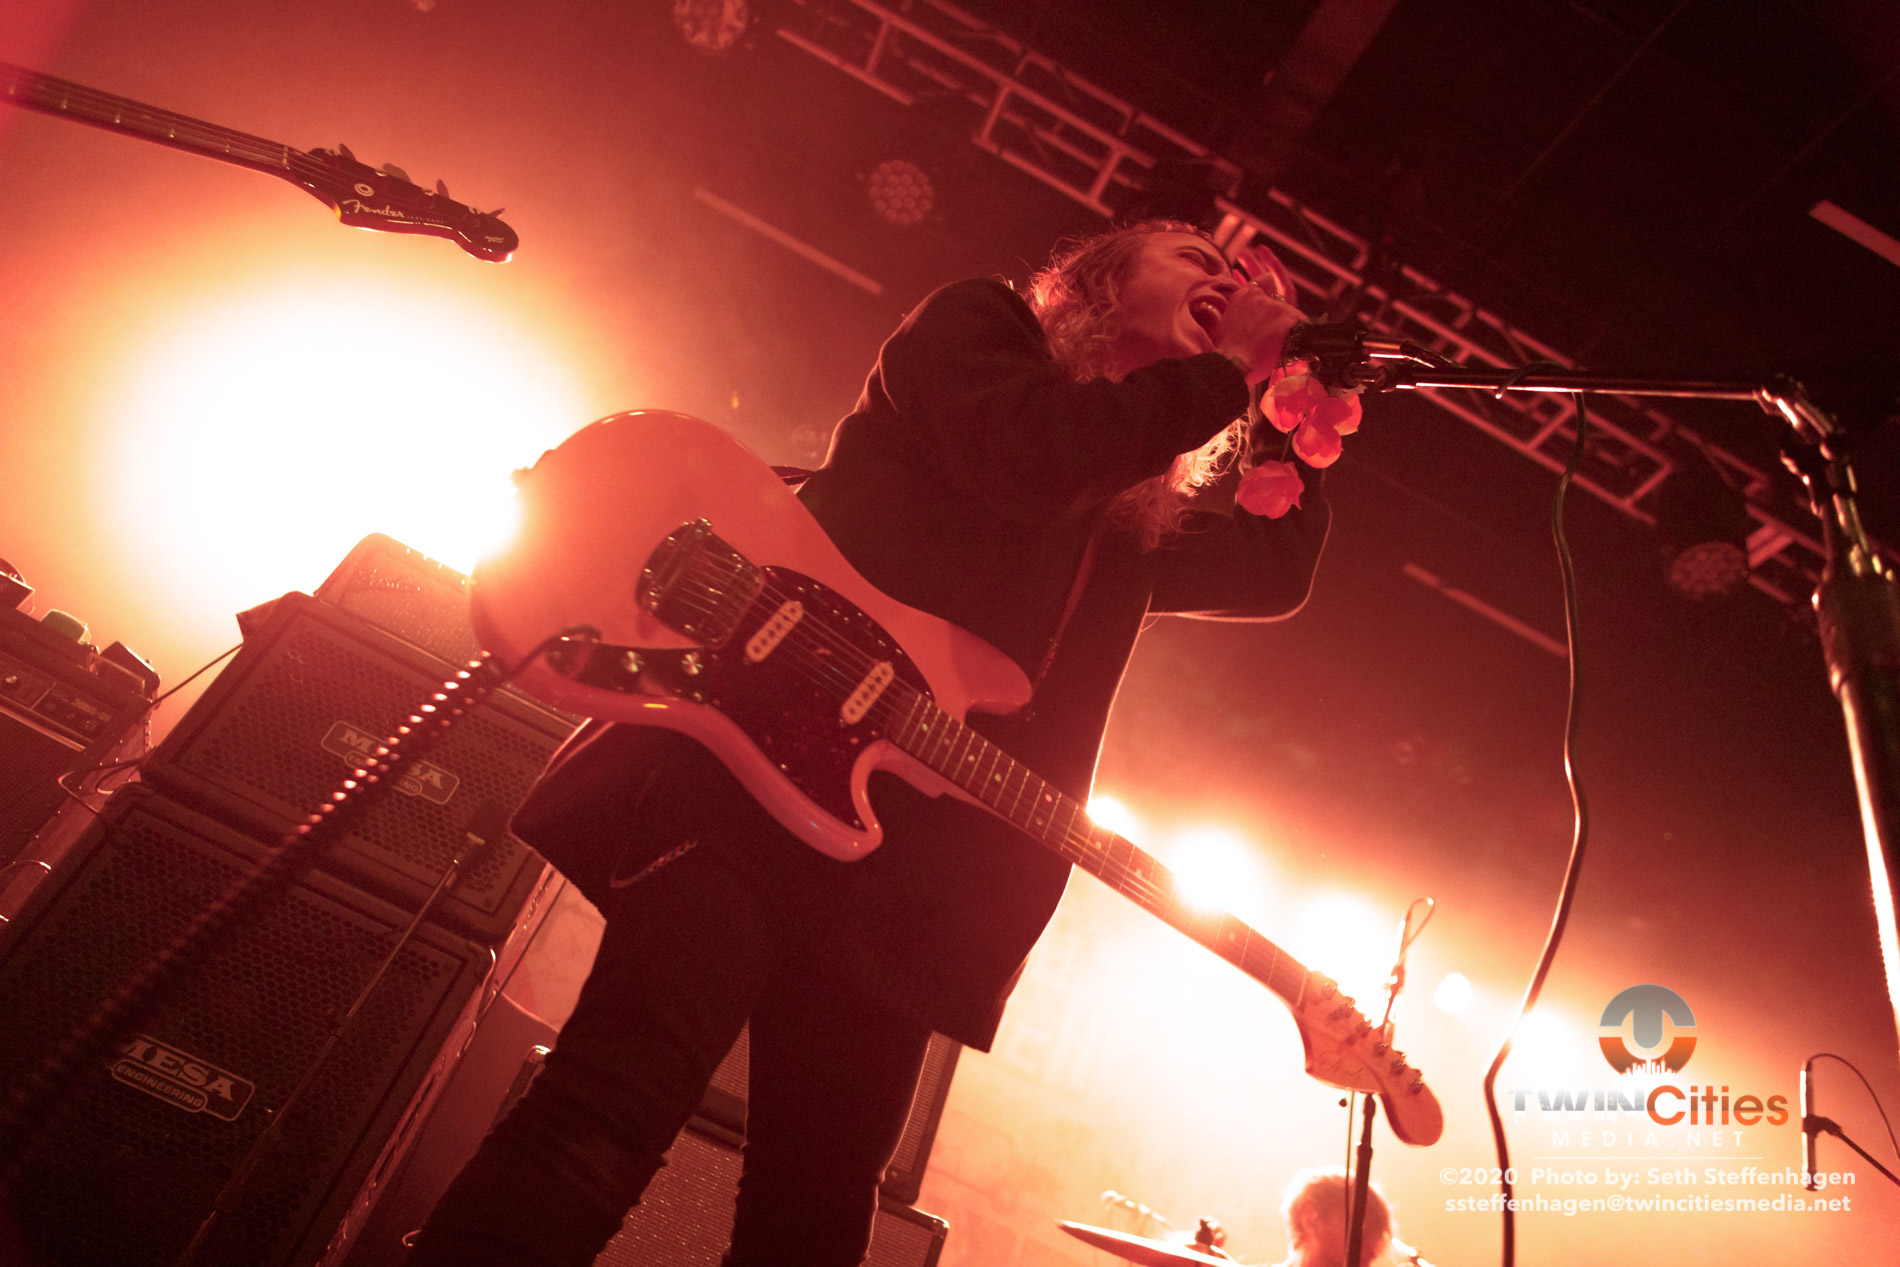 January 30, 2020 - Minneapolis, Minnesota, United States -  Holy Fawn live in concert at First Avenue opening for Thrice.

(Photo by Seth Steffenhagen/Steffenhagen Photography)